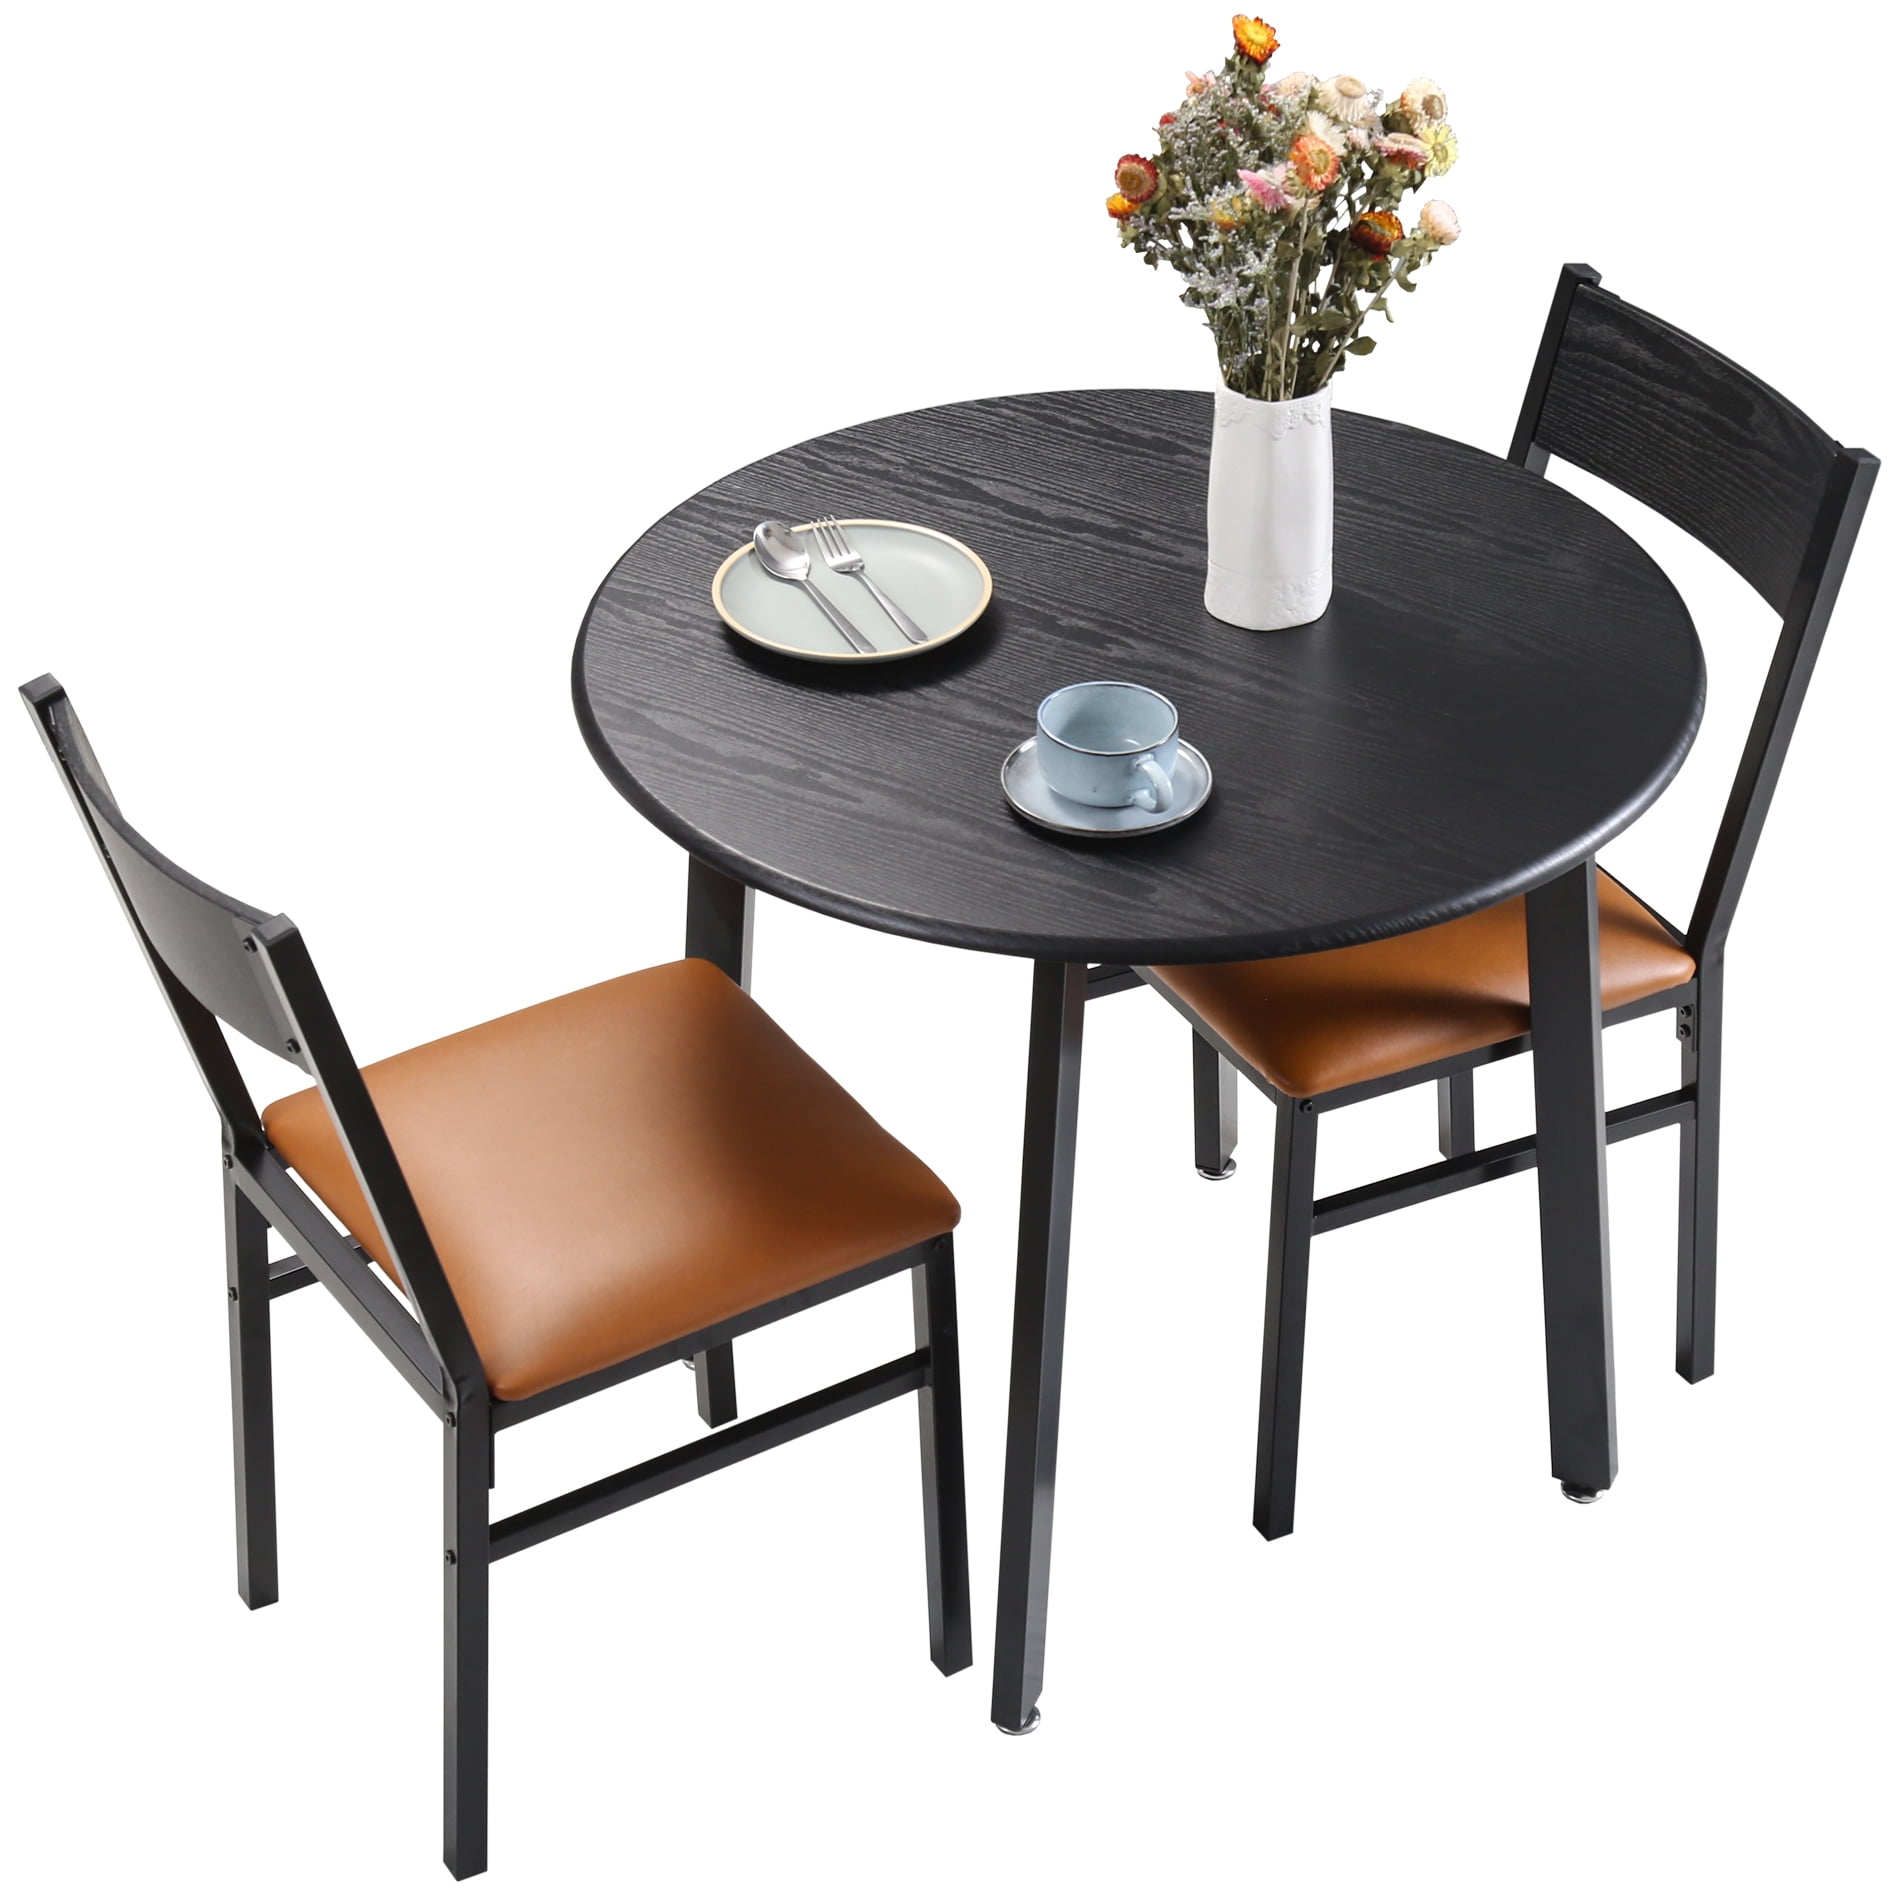 3 Piece Round Dining Table Set With, Circular Kitchen Table And Chairs Set